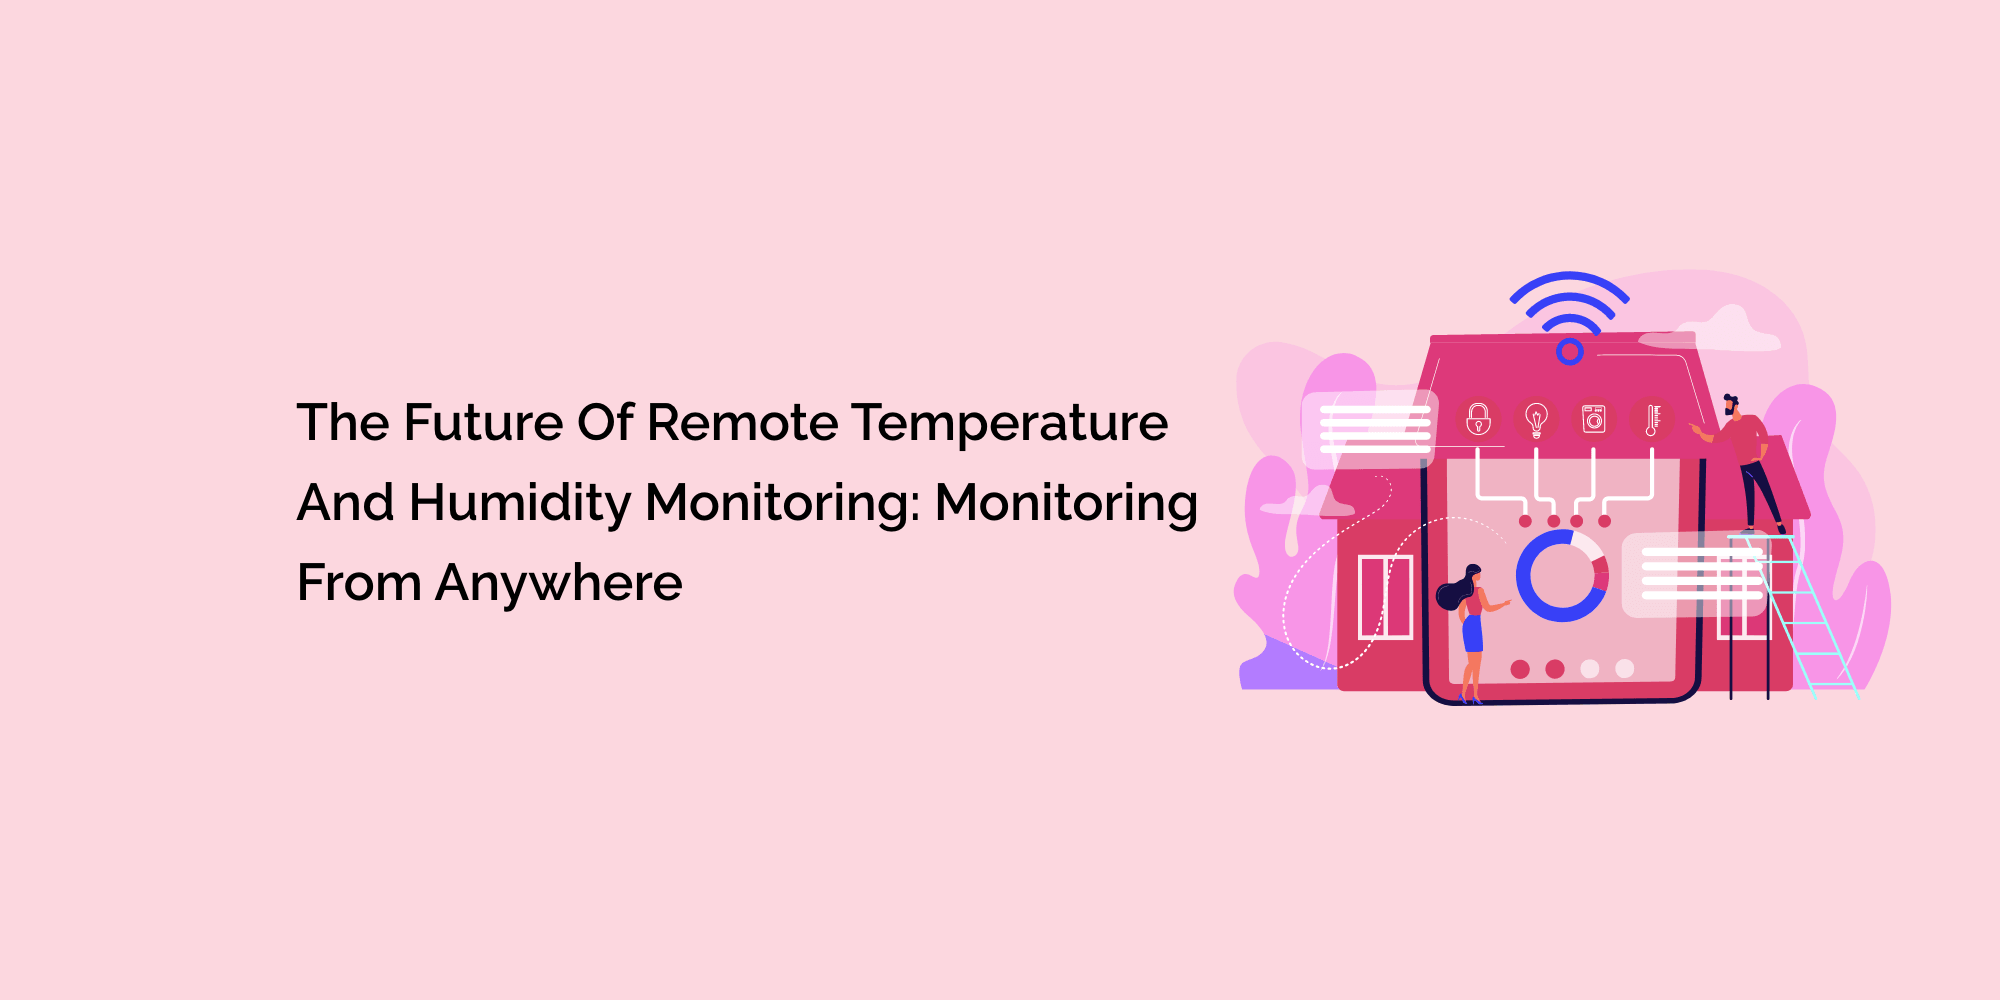 The Future of Remote Temperature and Humidity Monitoring: Monitoring from Anywhere